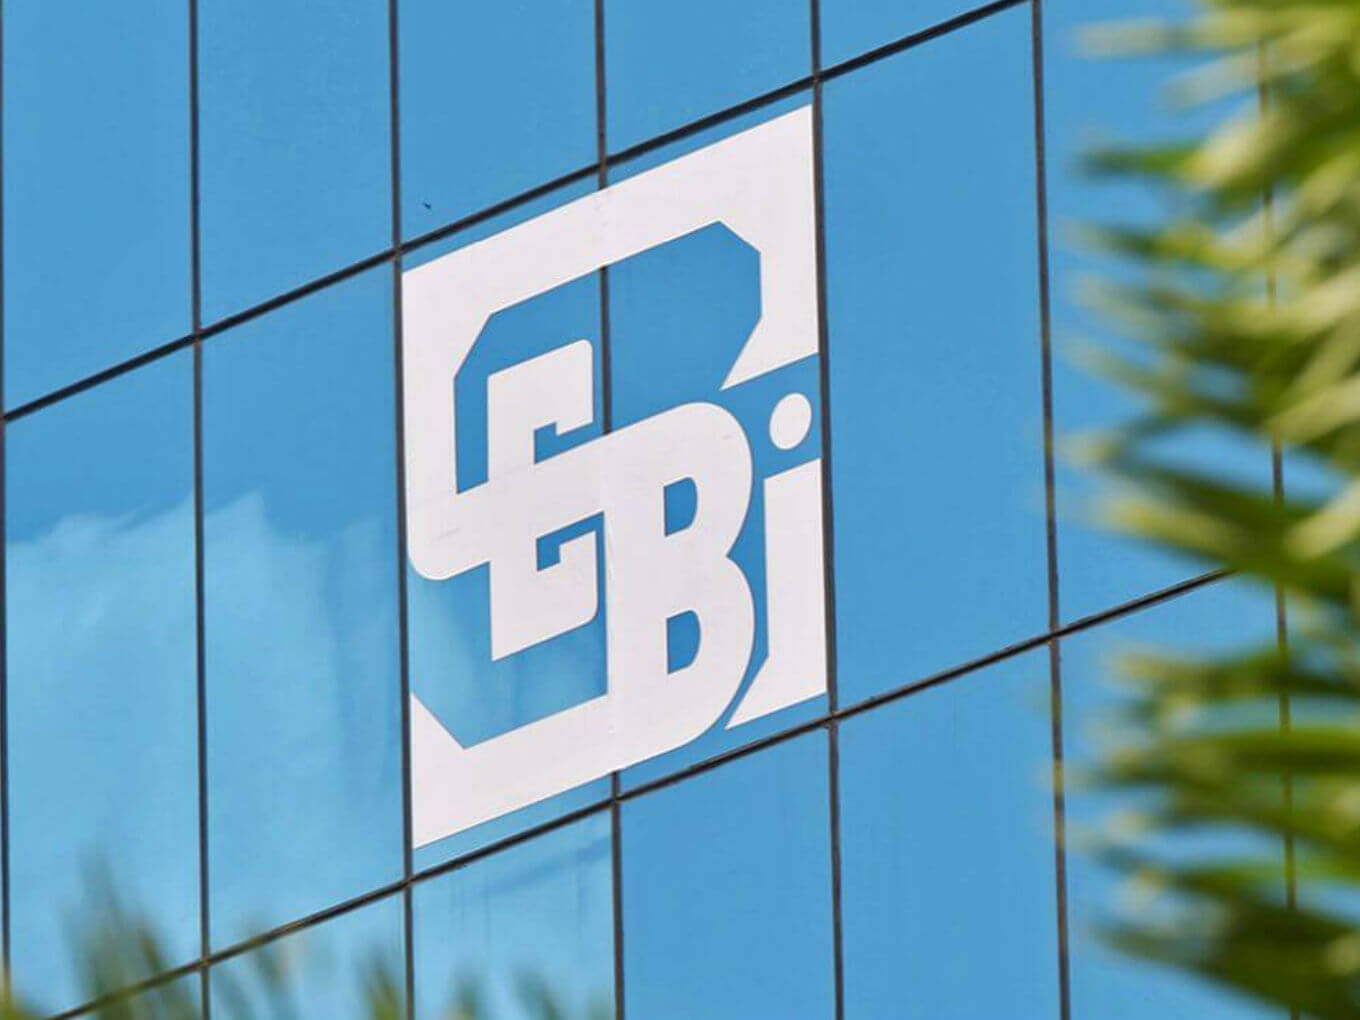 SEBI Approves Regulatory Sandbox To Act As Testing Ground For New Business Models